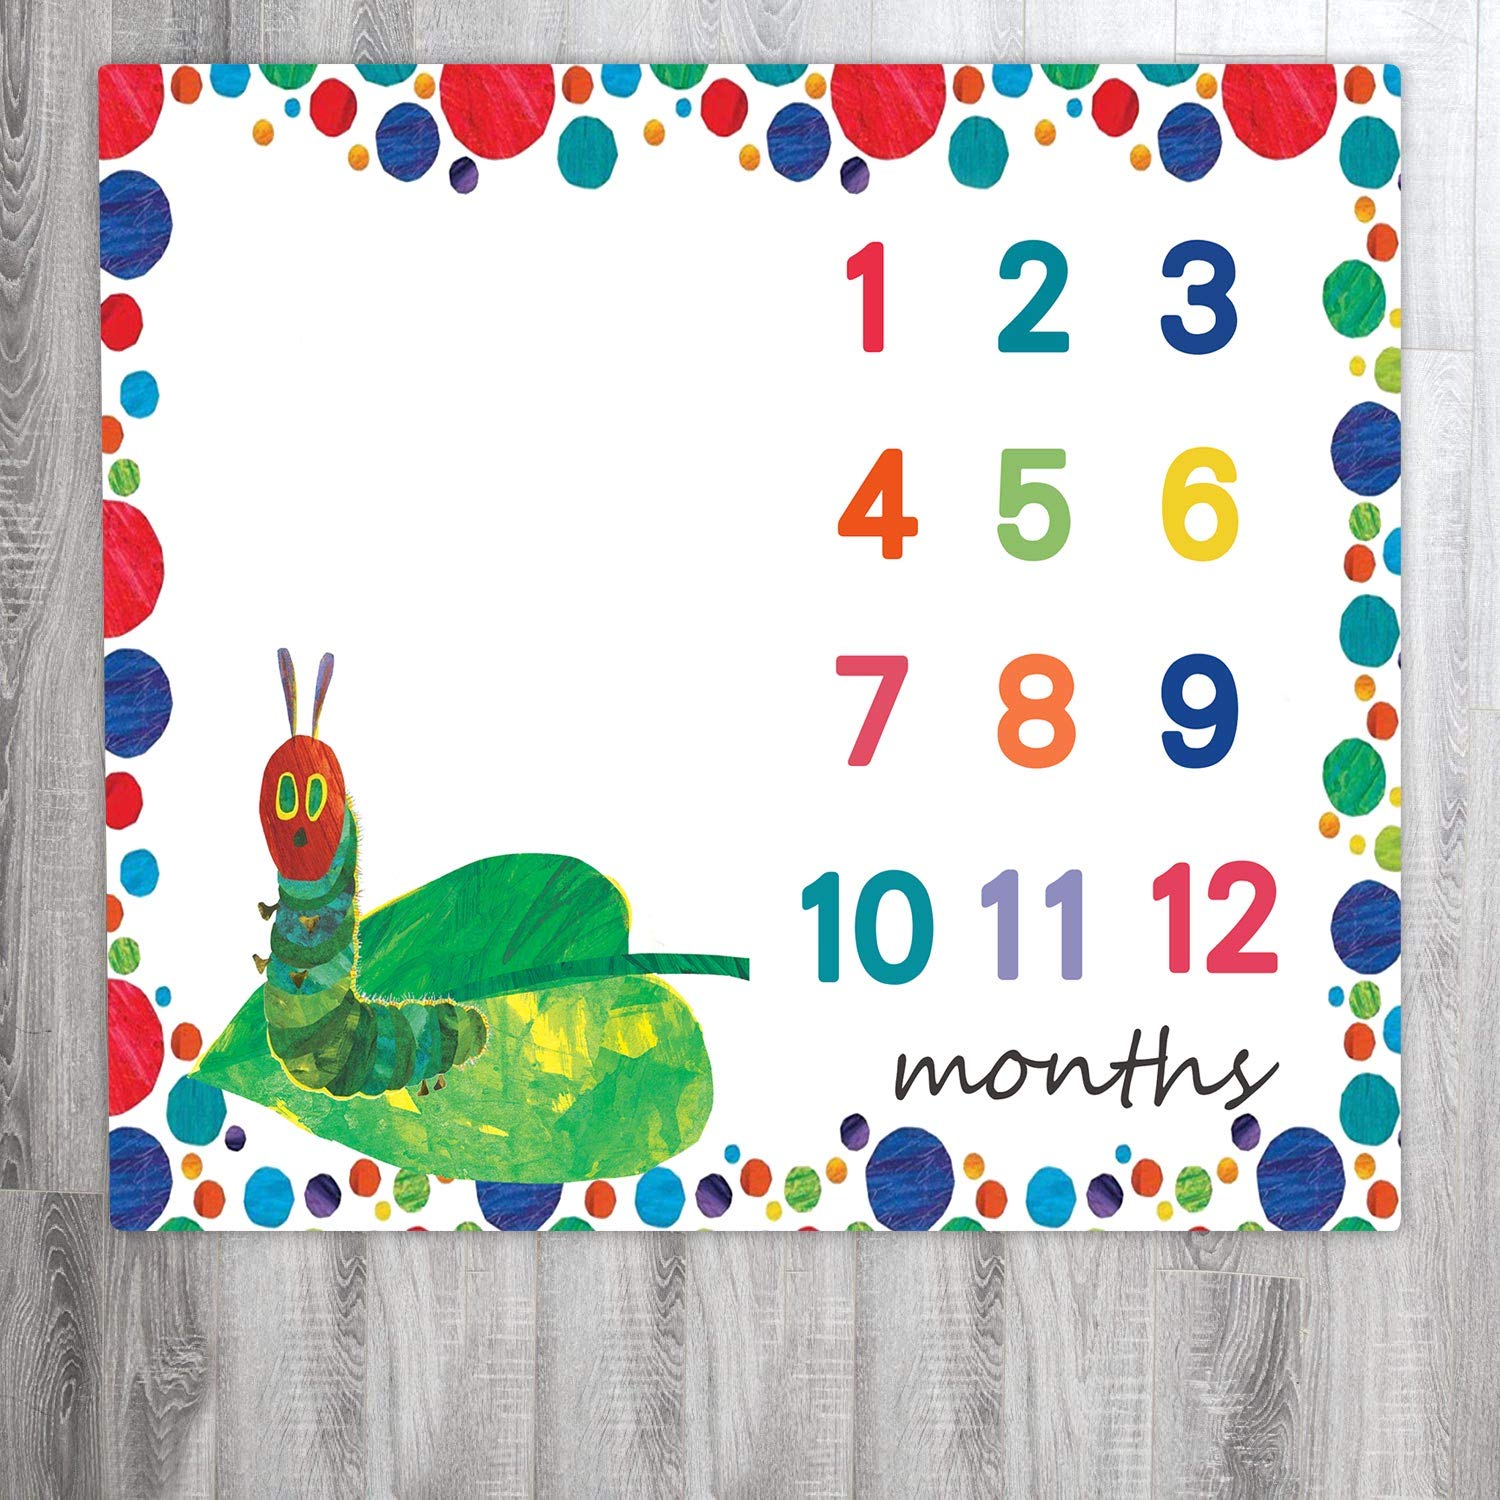 EARVO Baby Milestone Blanket 47x40 inches The Very Hungry Caterpillar Baby Photography Blanket Dots Large Size Watch Me Grow Blanket Newborn Photo Props EADS474